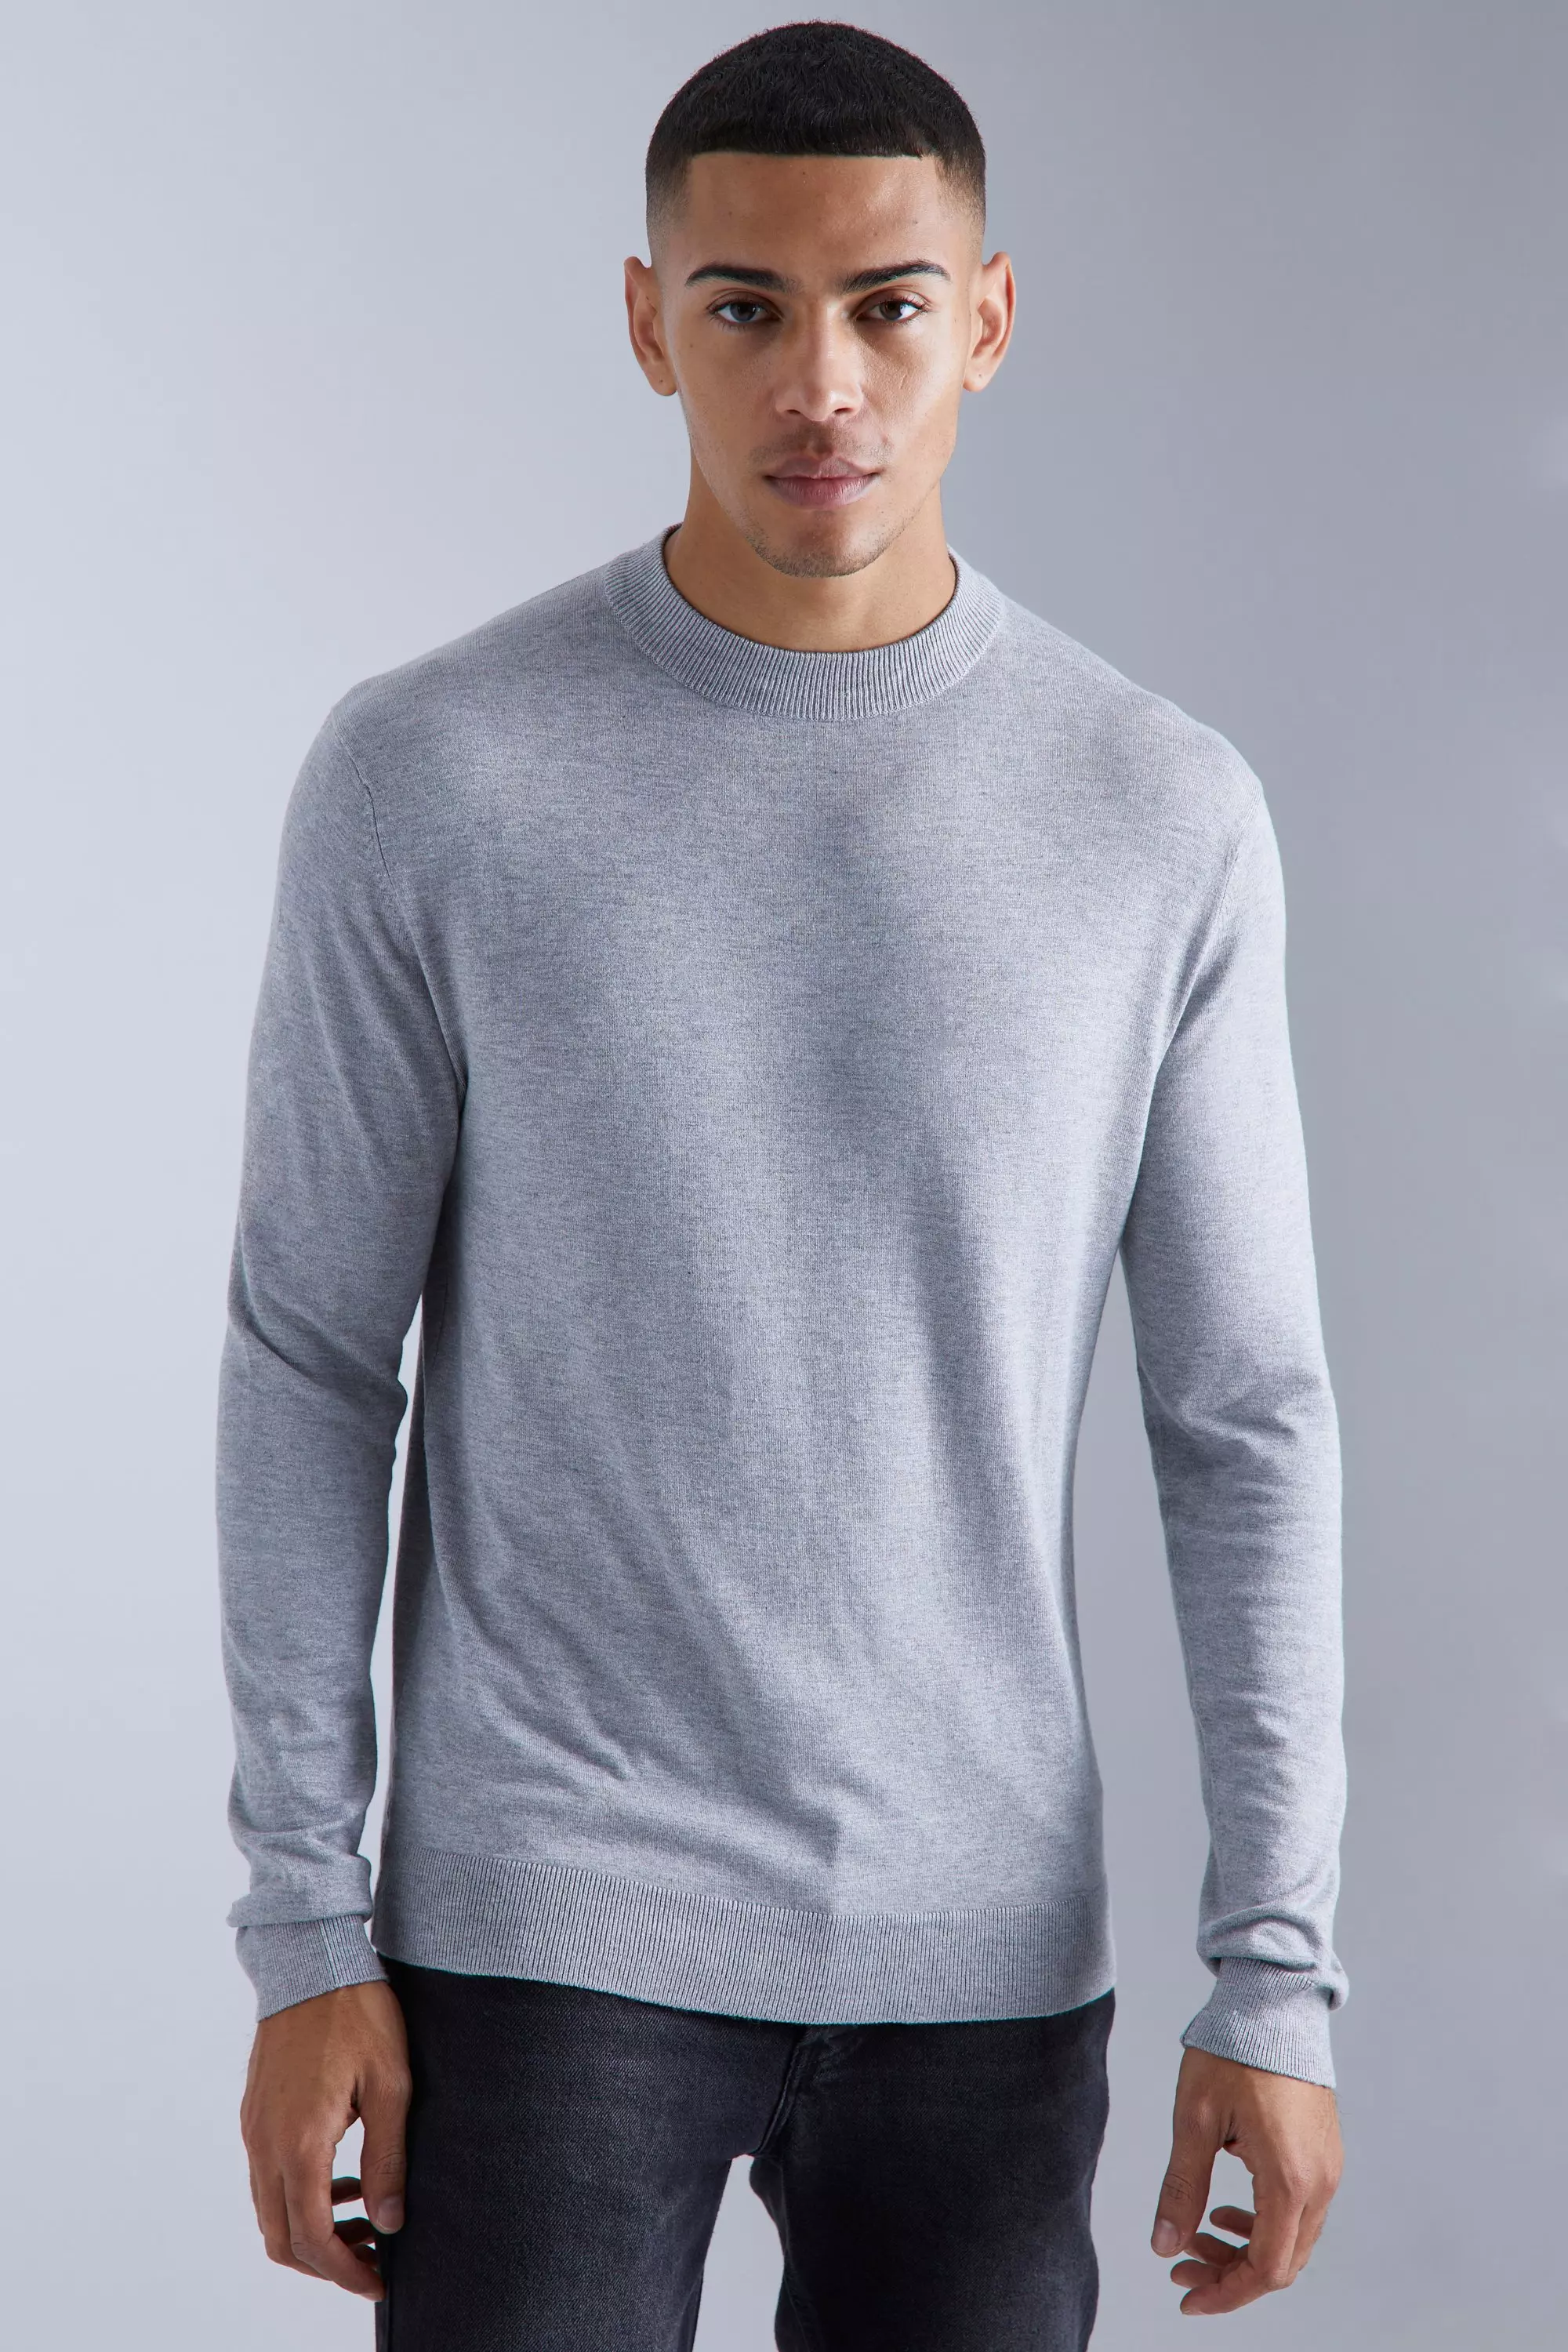 Muscle Fit Ribbed Extended Neck Sweater Grey marl